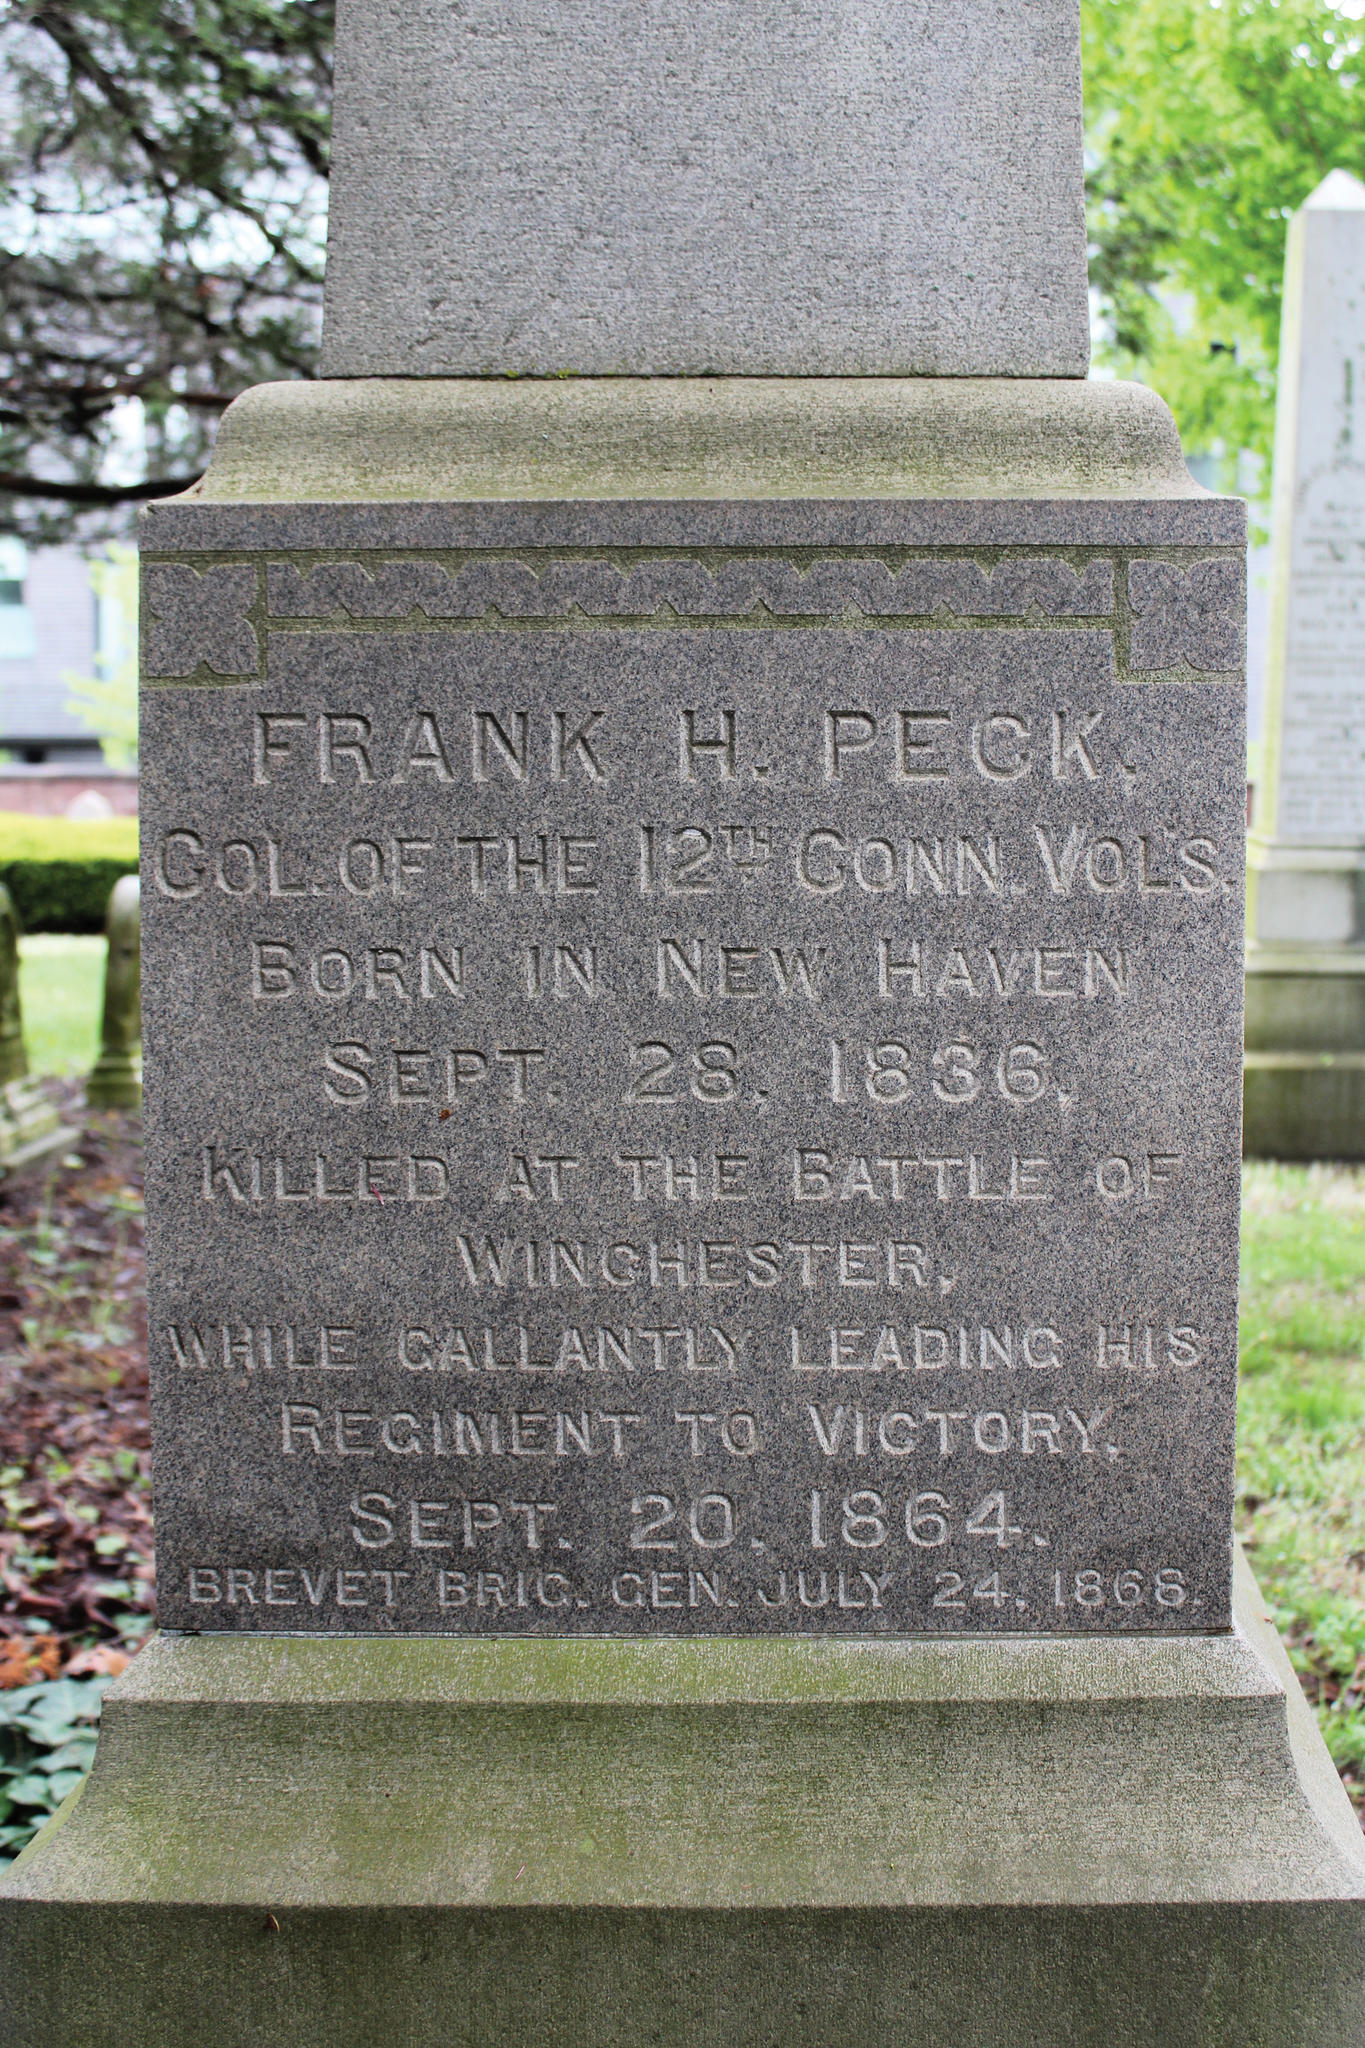 <span><span style="background-color:transparent">Born in New Haven and graduated from Yale in 1856. He was appointed a major in the 12th Connecticut Volunteer Infantry and rose to Colonel. Peck was killed in action at the Third Battle of Winchester on September 19, 1864. He was posthumously breveted to Brigadier General of U.S. Volunteers for “conspicuous gallantry at Winchester, Virginia.”</span></span><span><span style="background-color:transparent">Location: 77 Cedar</span></span> 